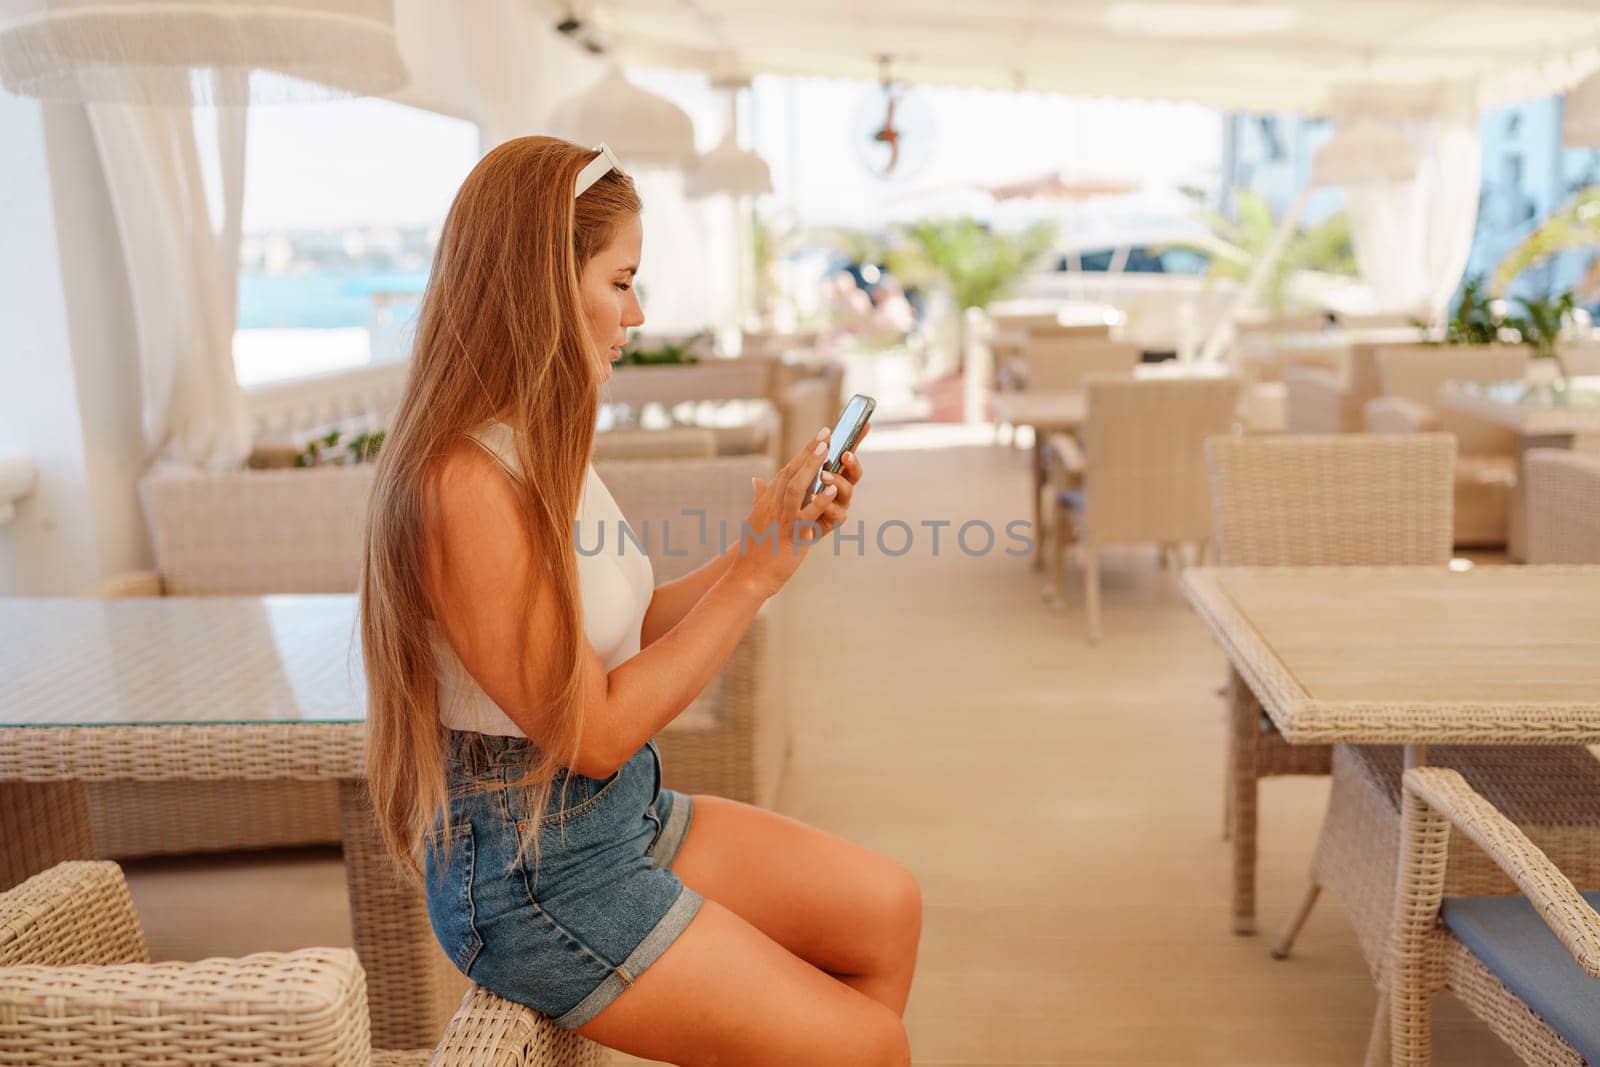 Cafe woman sitting at a table with a cell phone in her hand. She is looking at the screen and she is focused on her phone. The scene takes place in a restaurant or cafe, with multiple chairs. by Matiunina